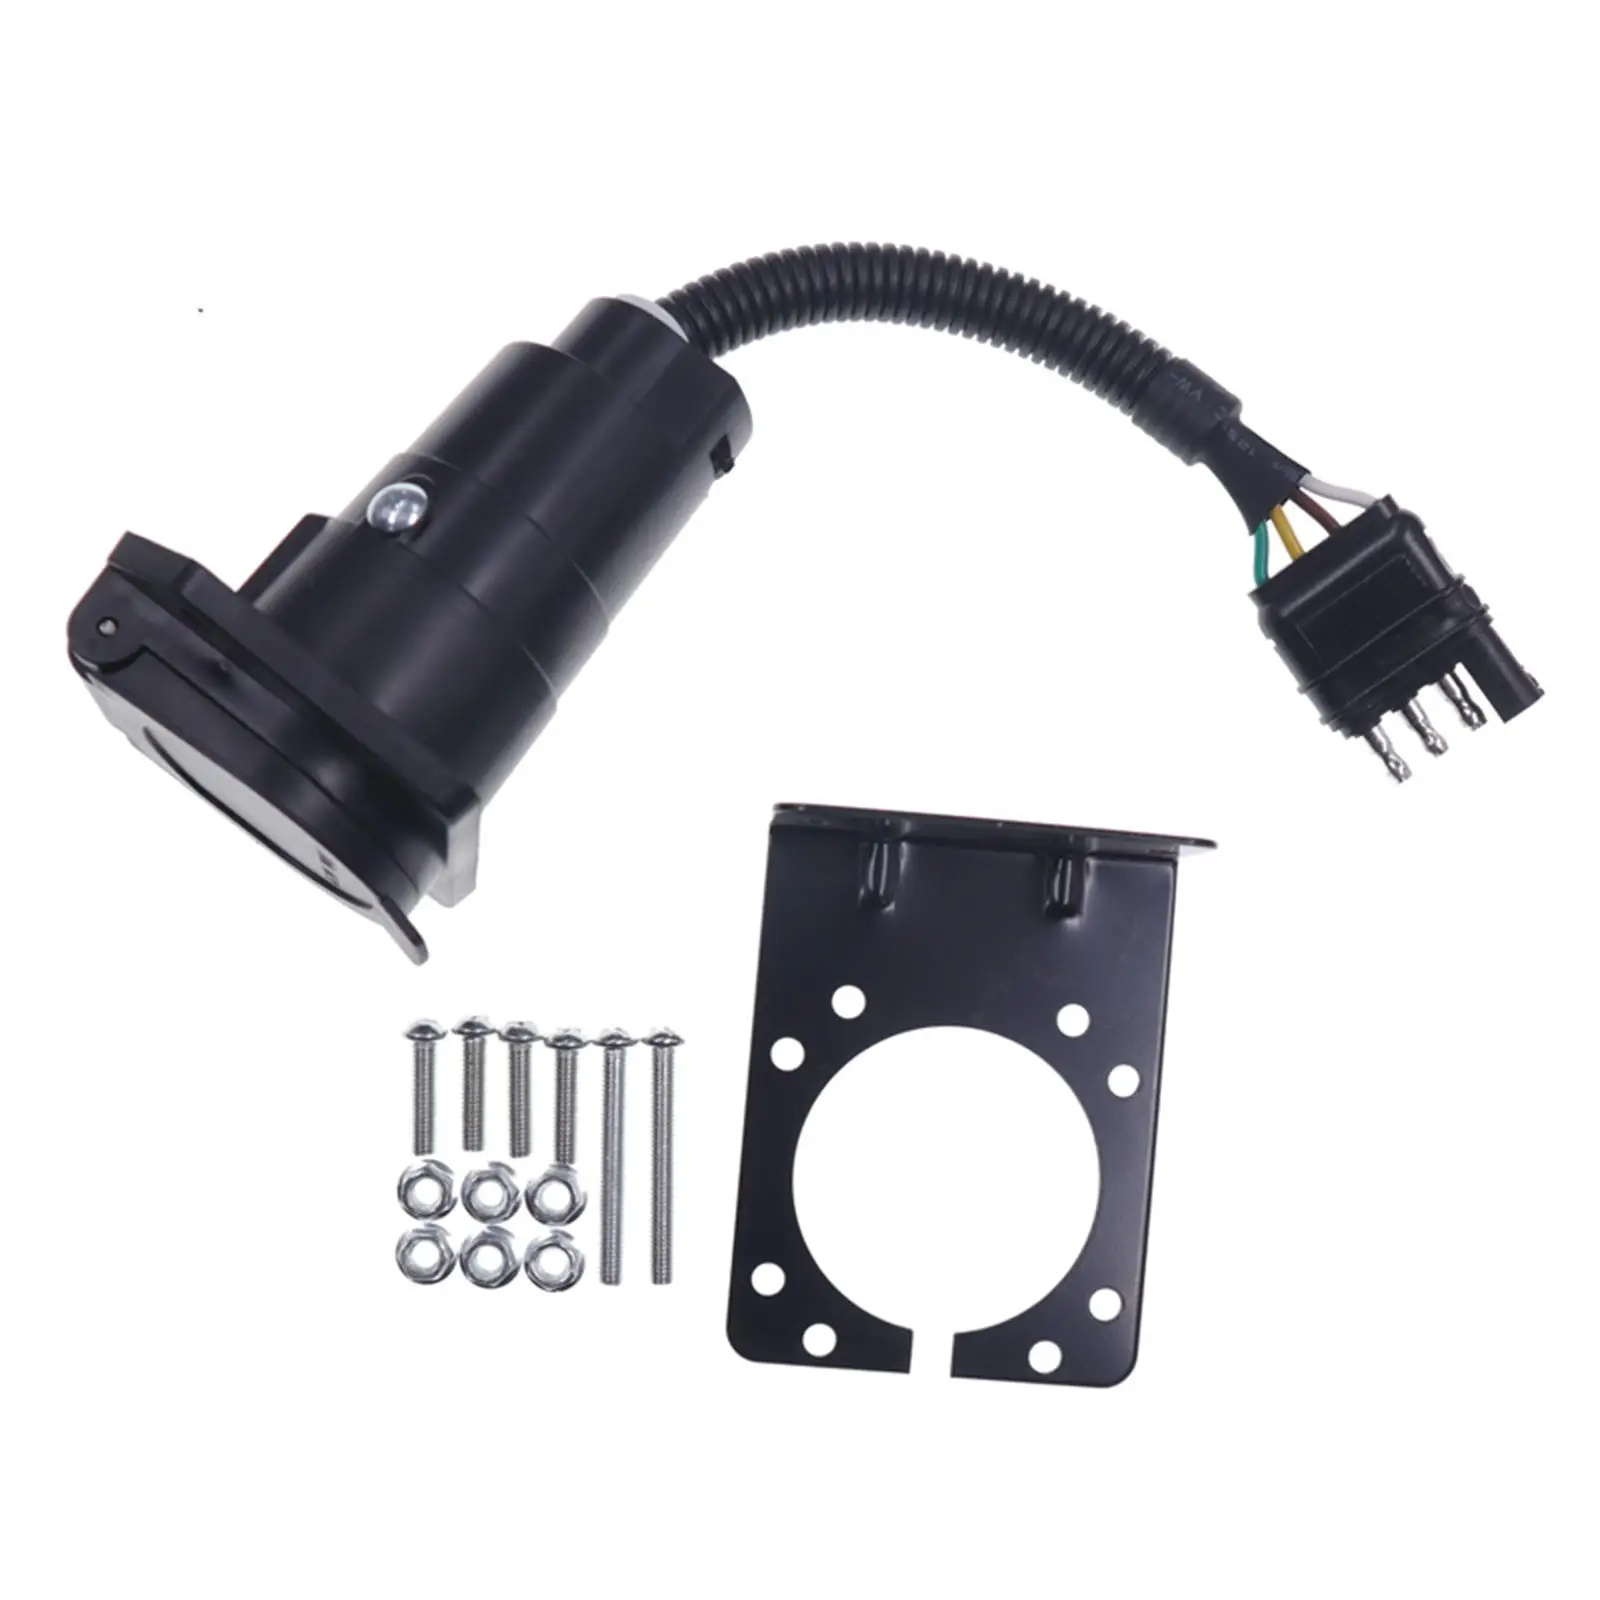 Trailer Adapter Plug 4 Pin to 7 Pin Trailer Connector Cable with Mounting Bracket for Truck Assembly Accessory Replacement